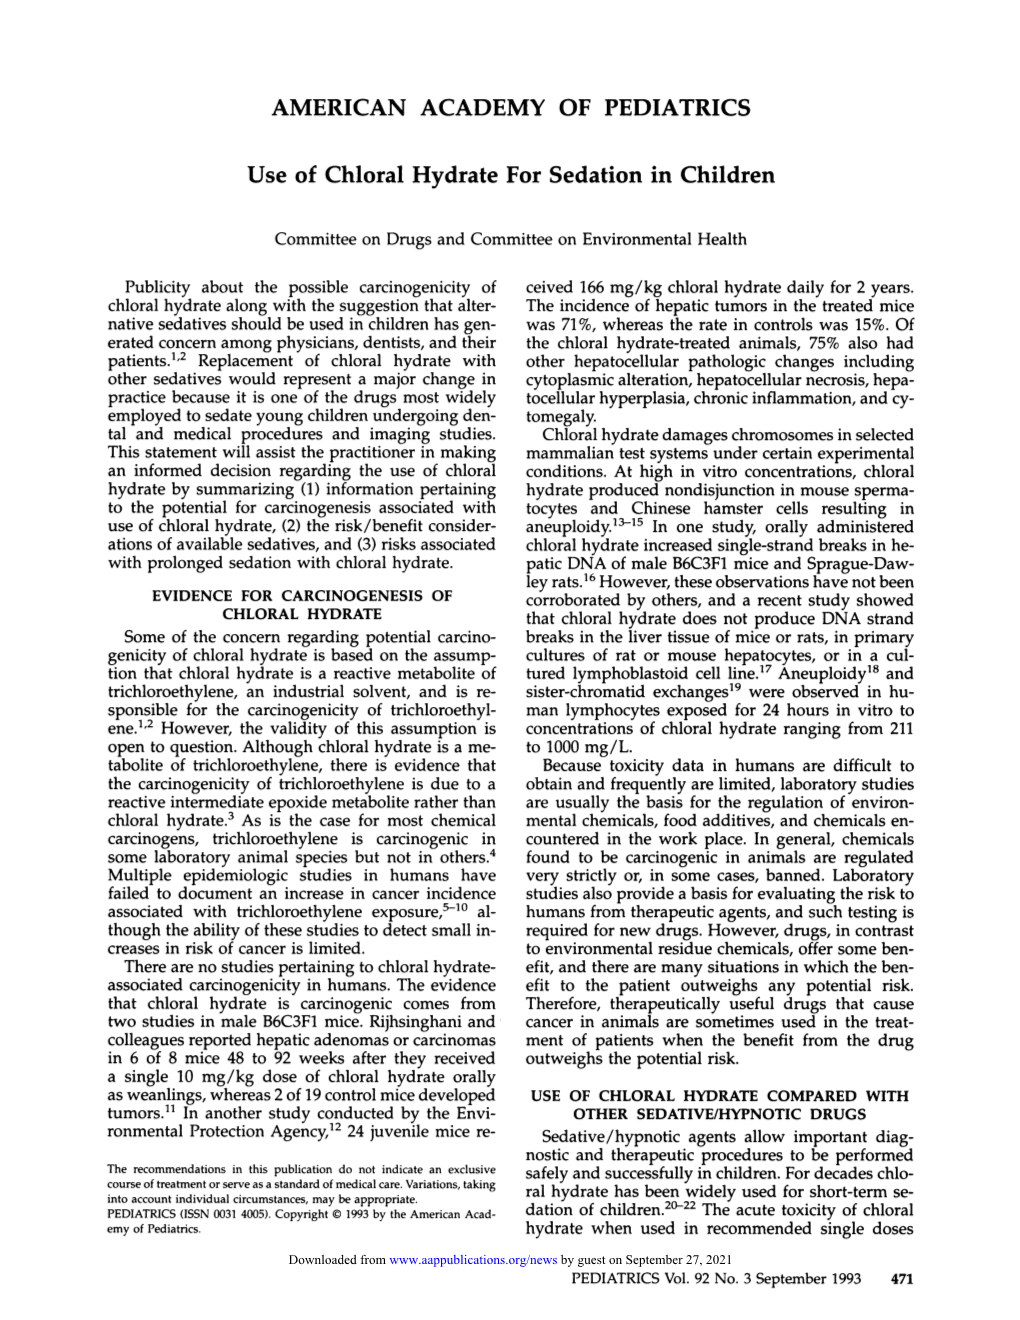 Use of Chloral Hydrate for Sedation in Children